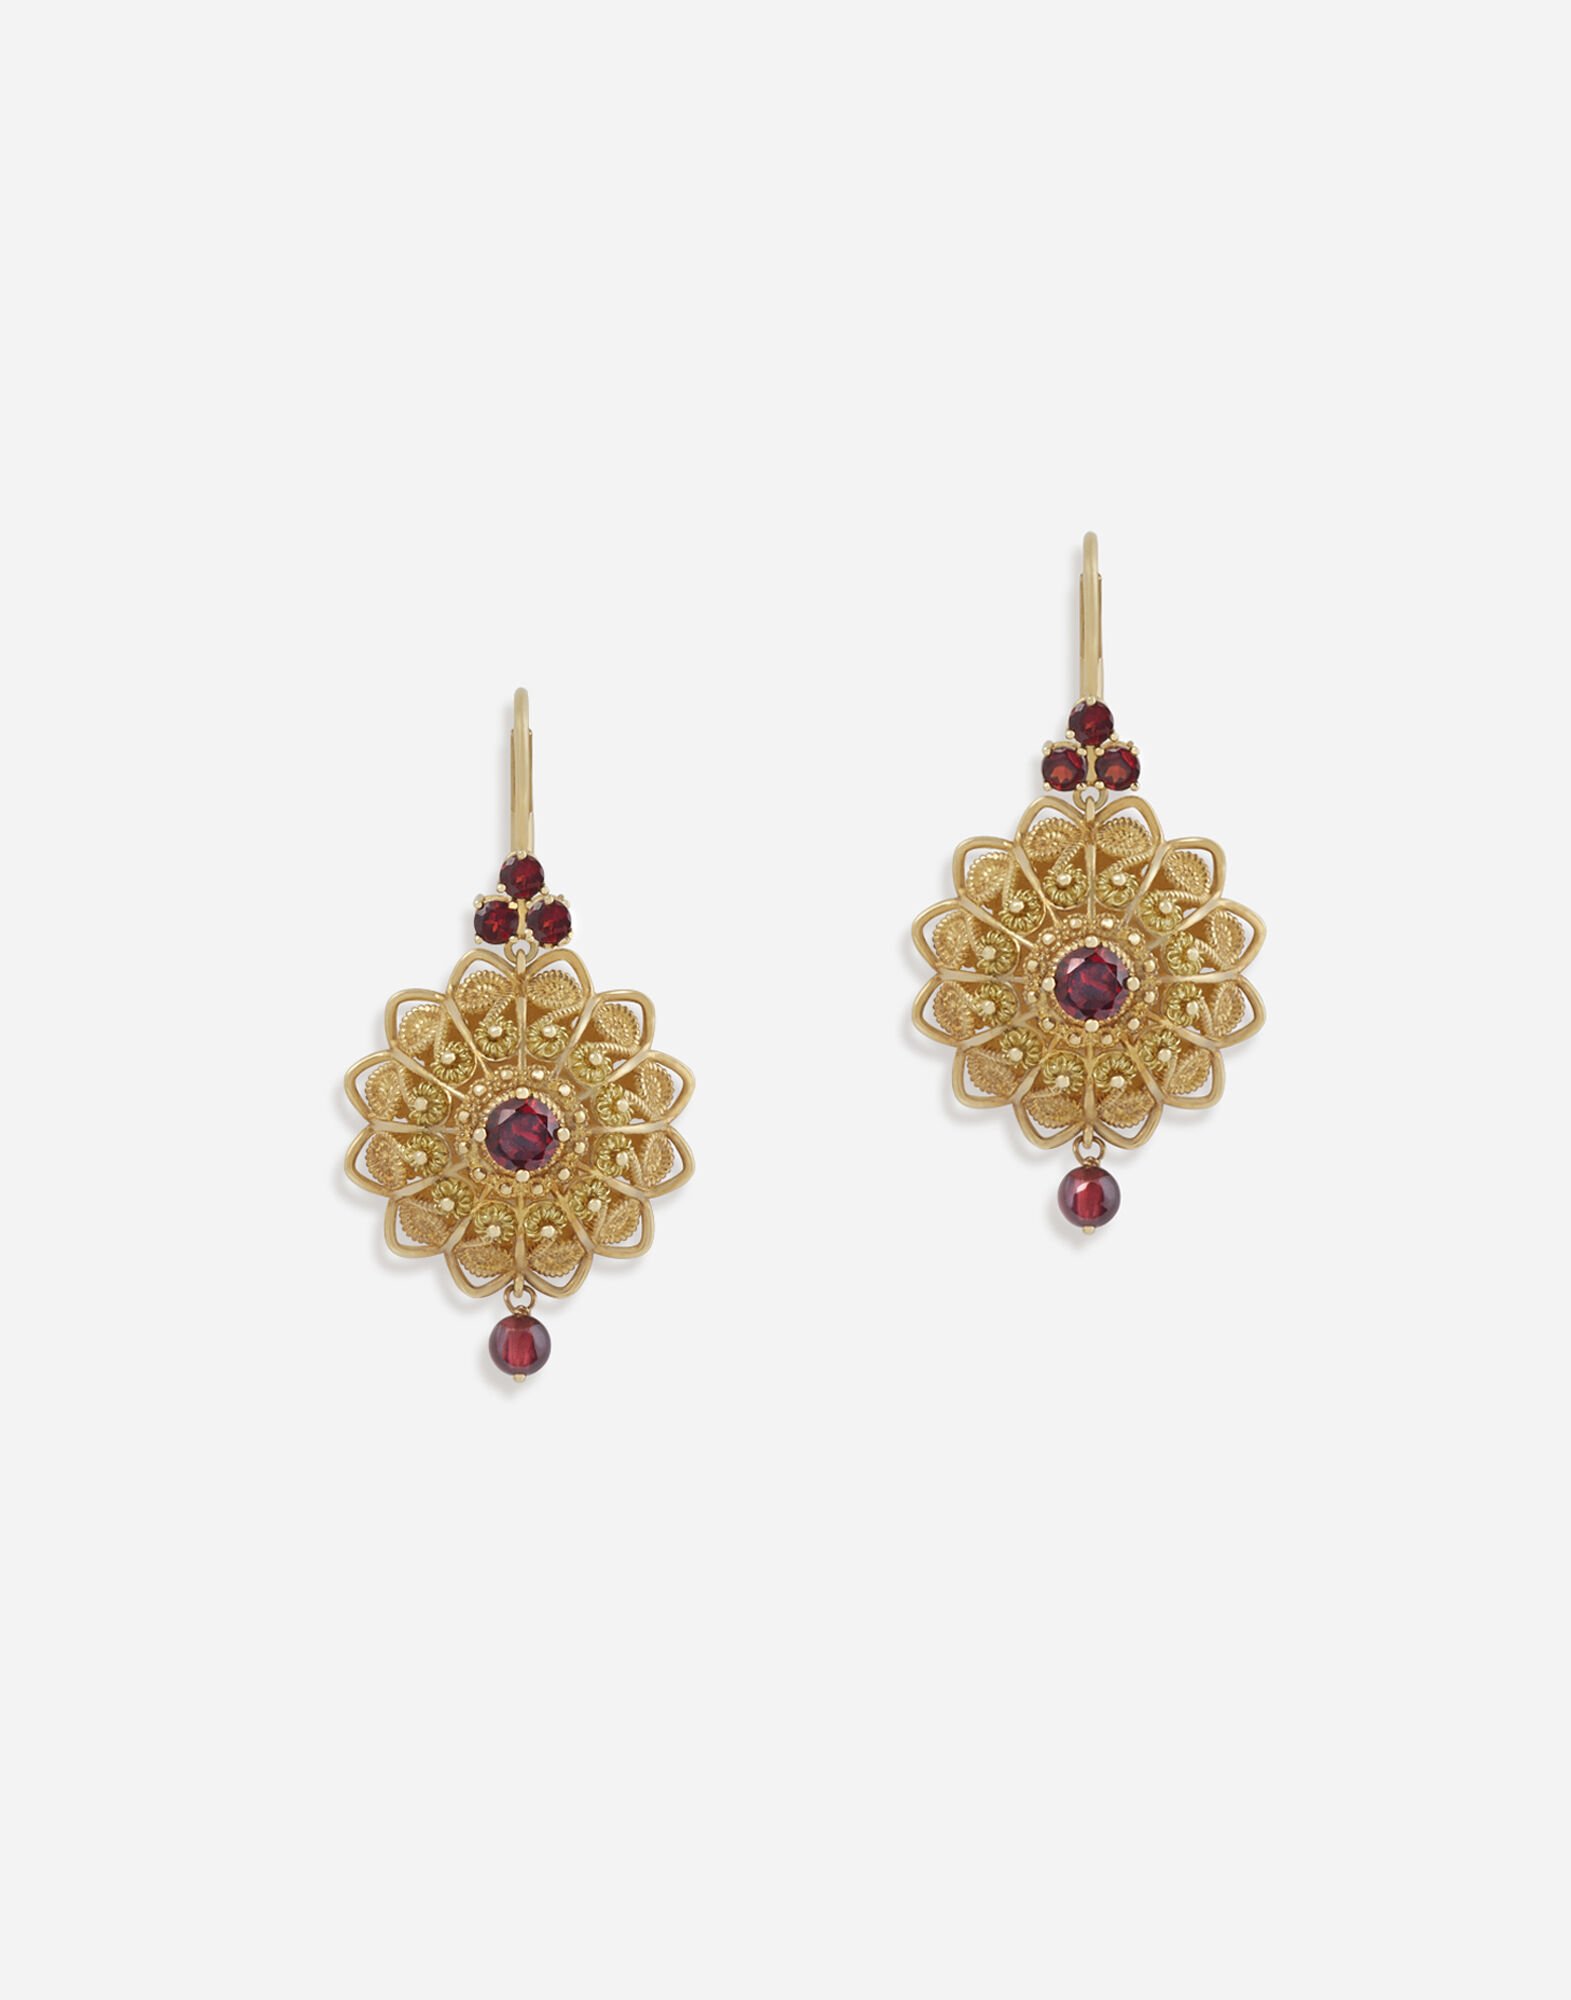 Dolce & Gabbana Pizzo earrings in yellow gold and rhodolite garnets Yellow Gold WALD1GWDPEY